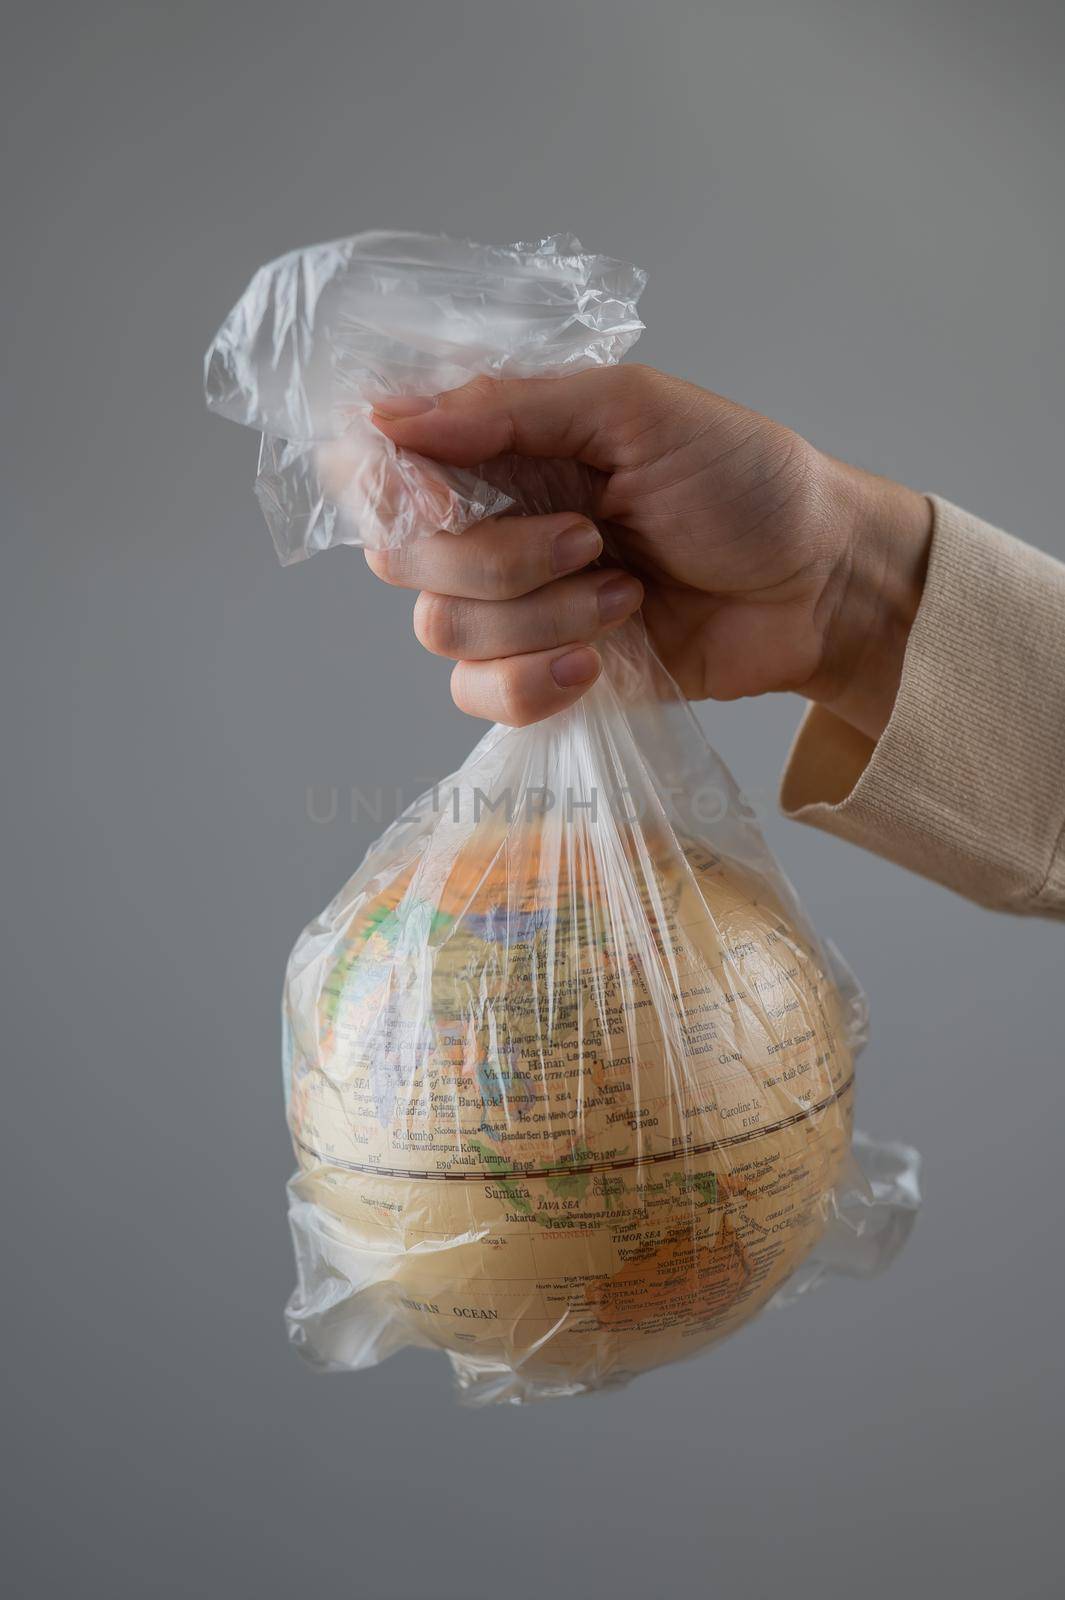 A woman is holding a globe in a plastic bag on a white background